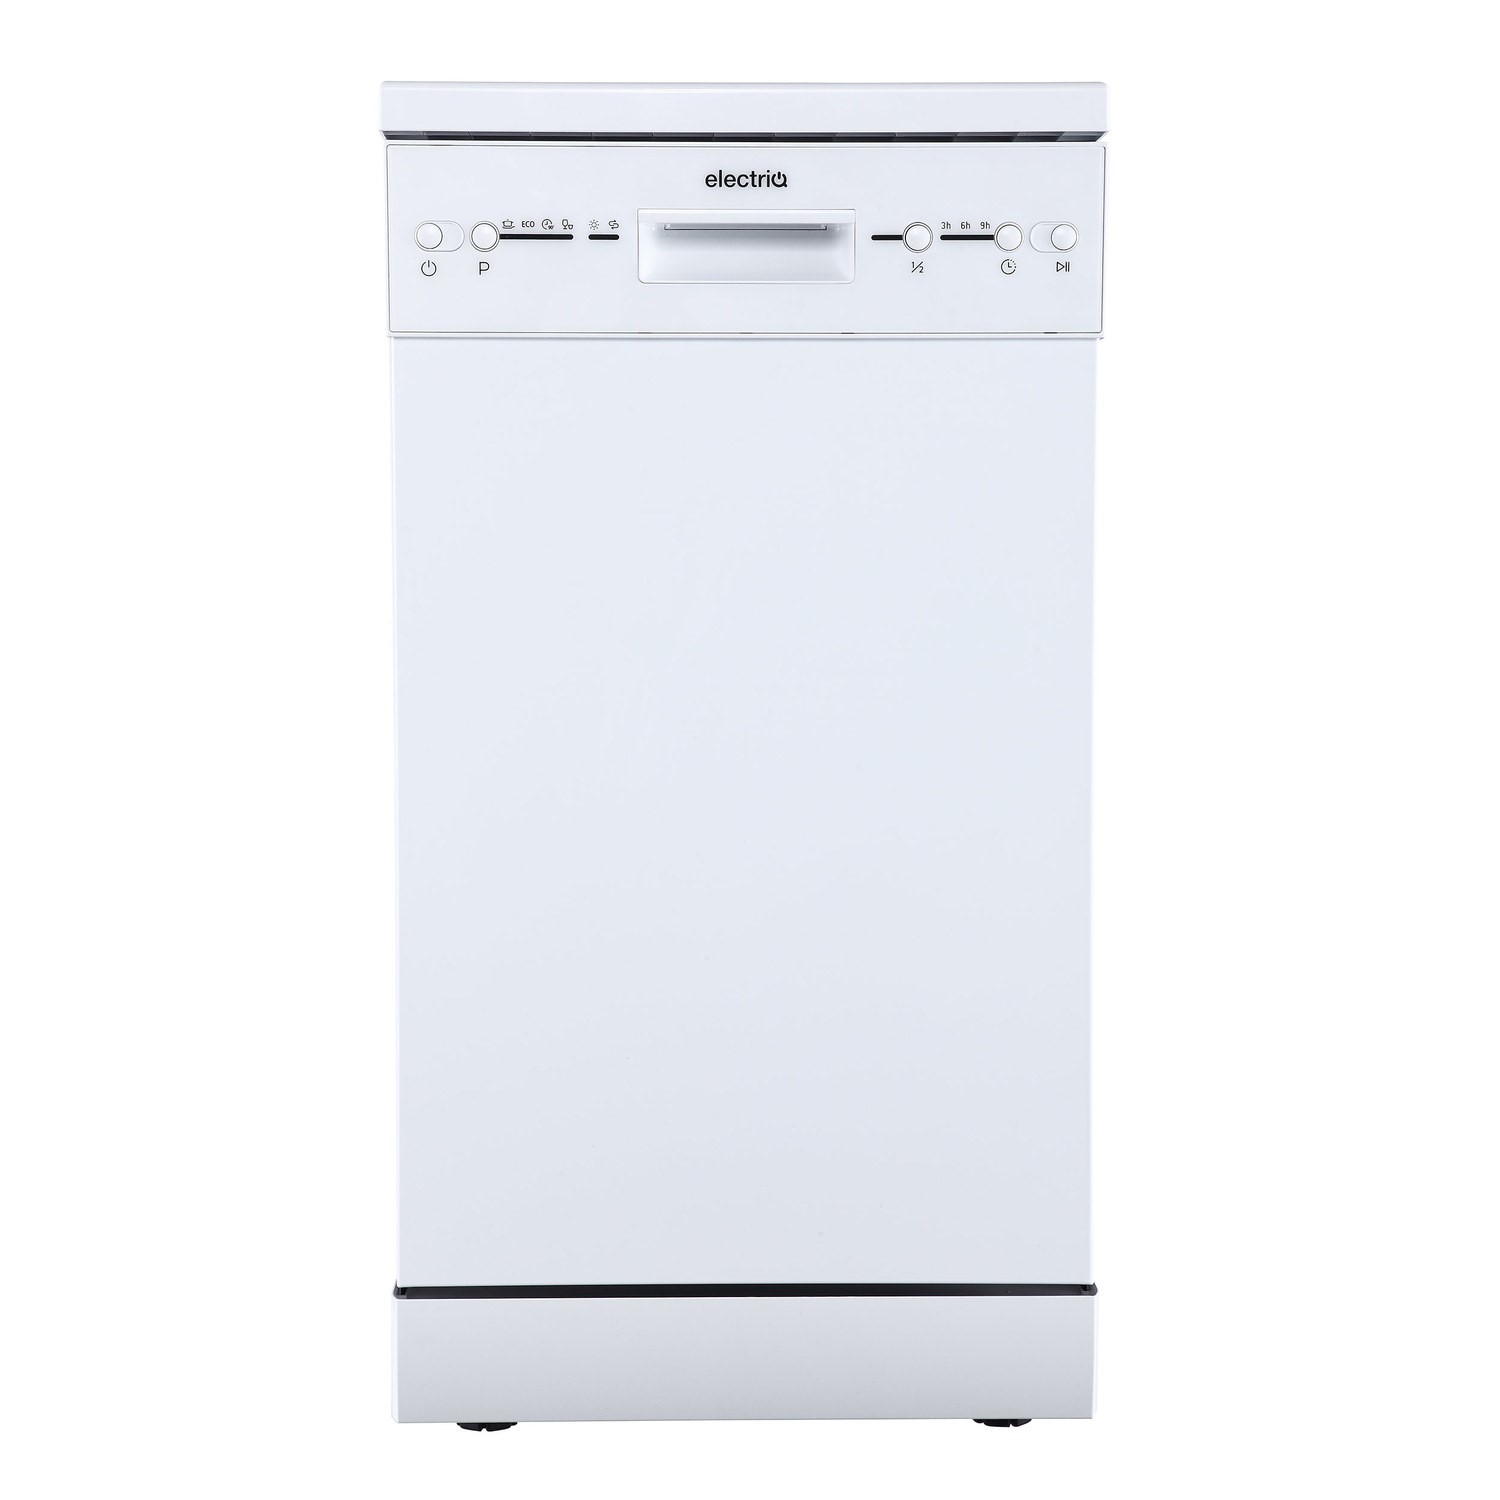 Photos - Other for Computer Electriq 10 Place Settings Freestanding Slimline Dishwasher - White WQP8-7 